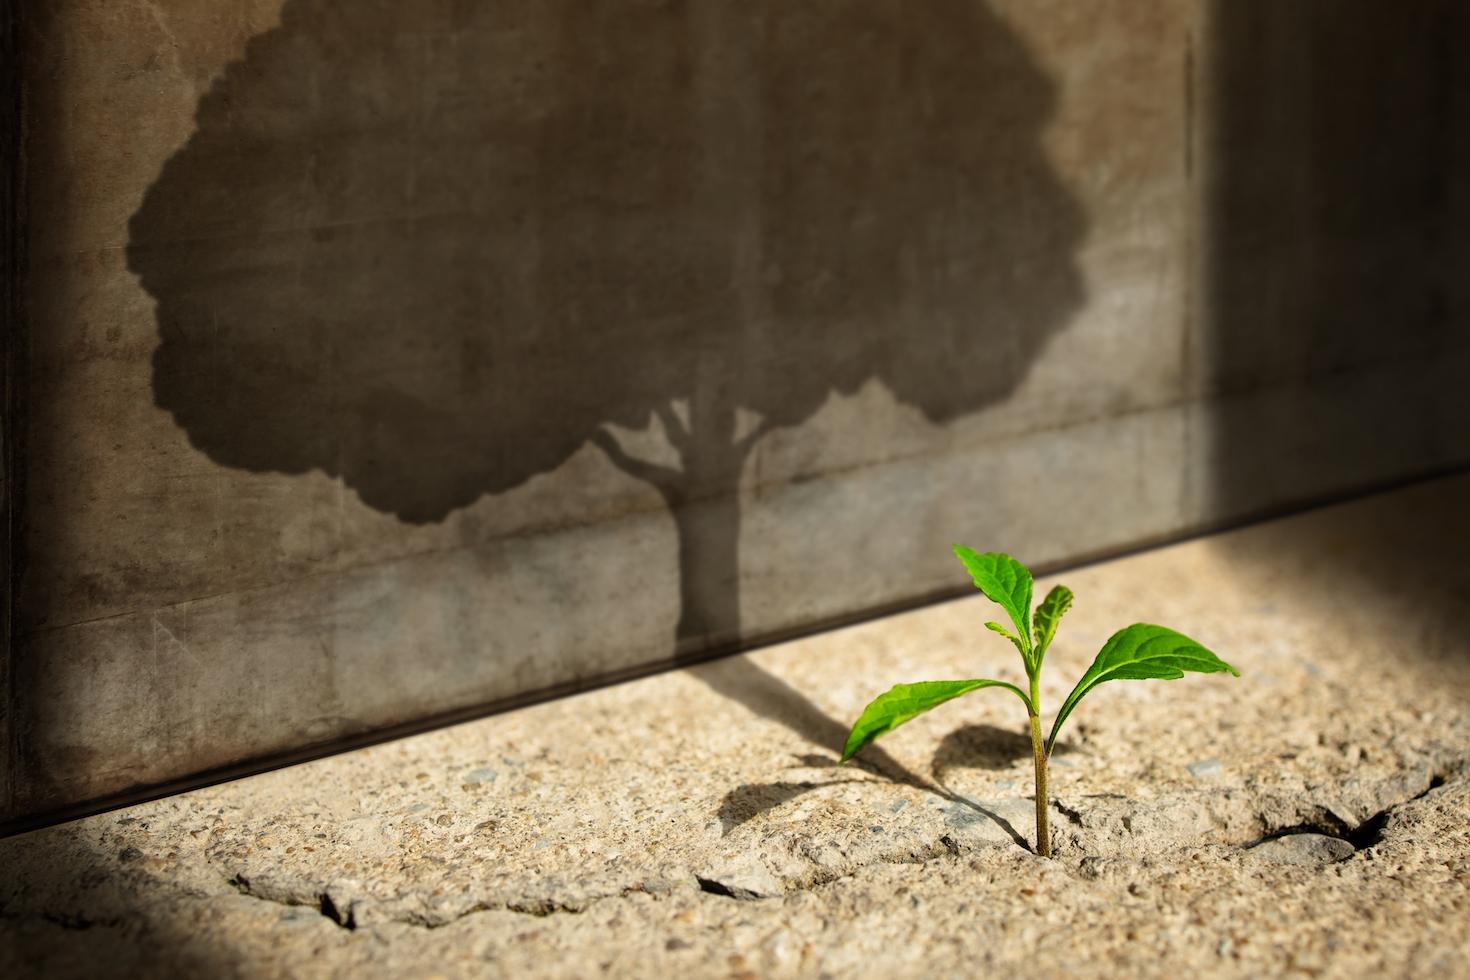 Green sprout growing from cracked concrete, shaded by a large tree shadow (demonstrating growth)